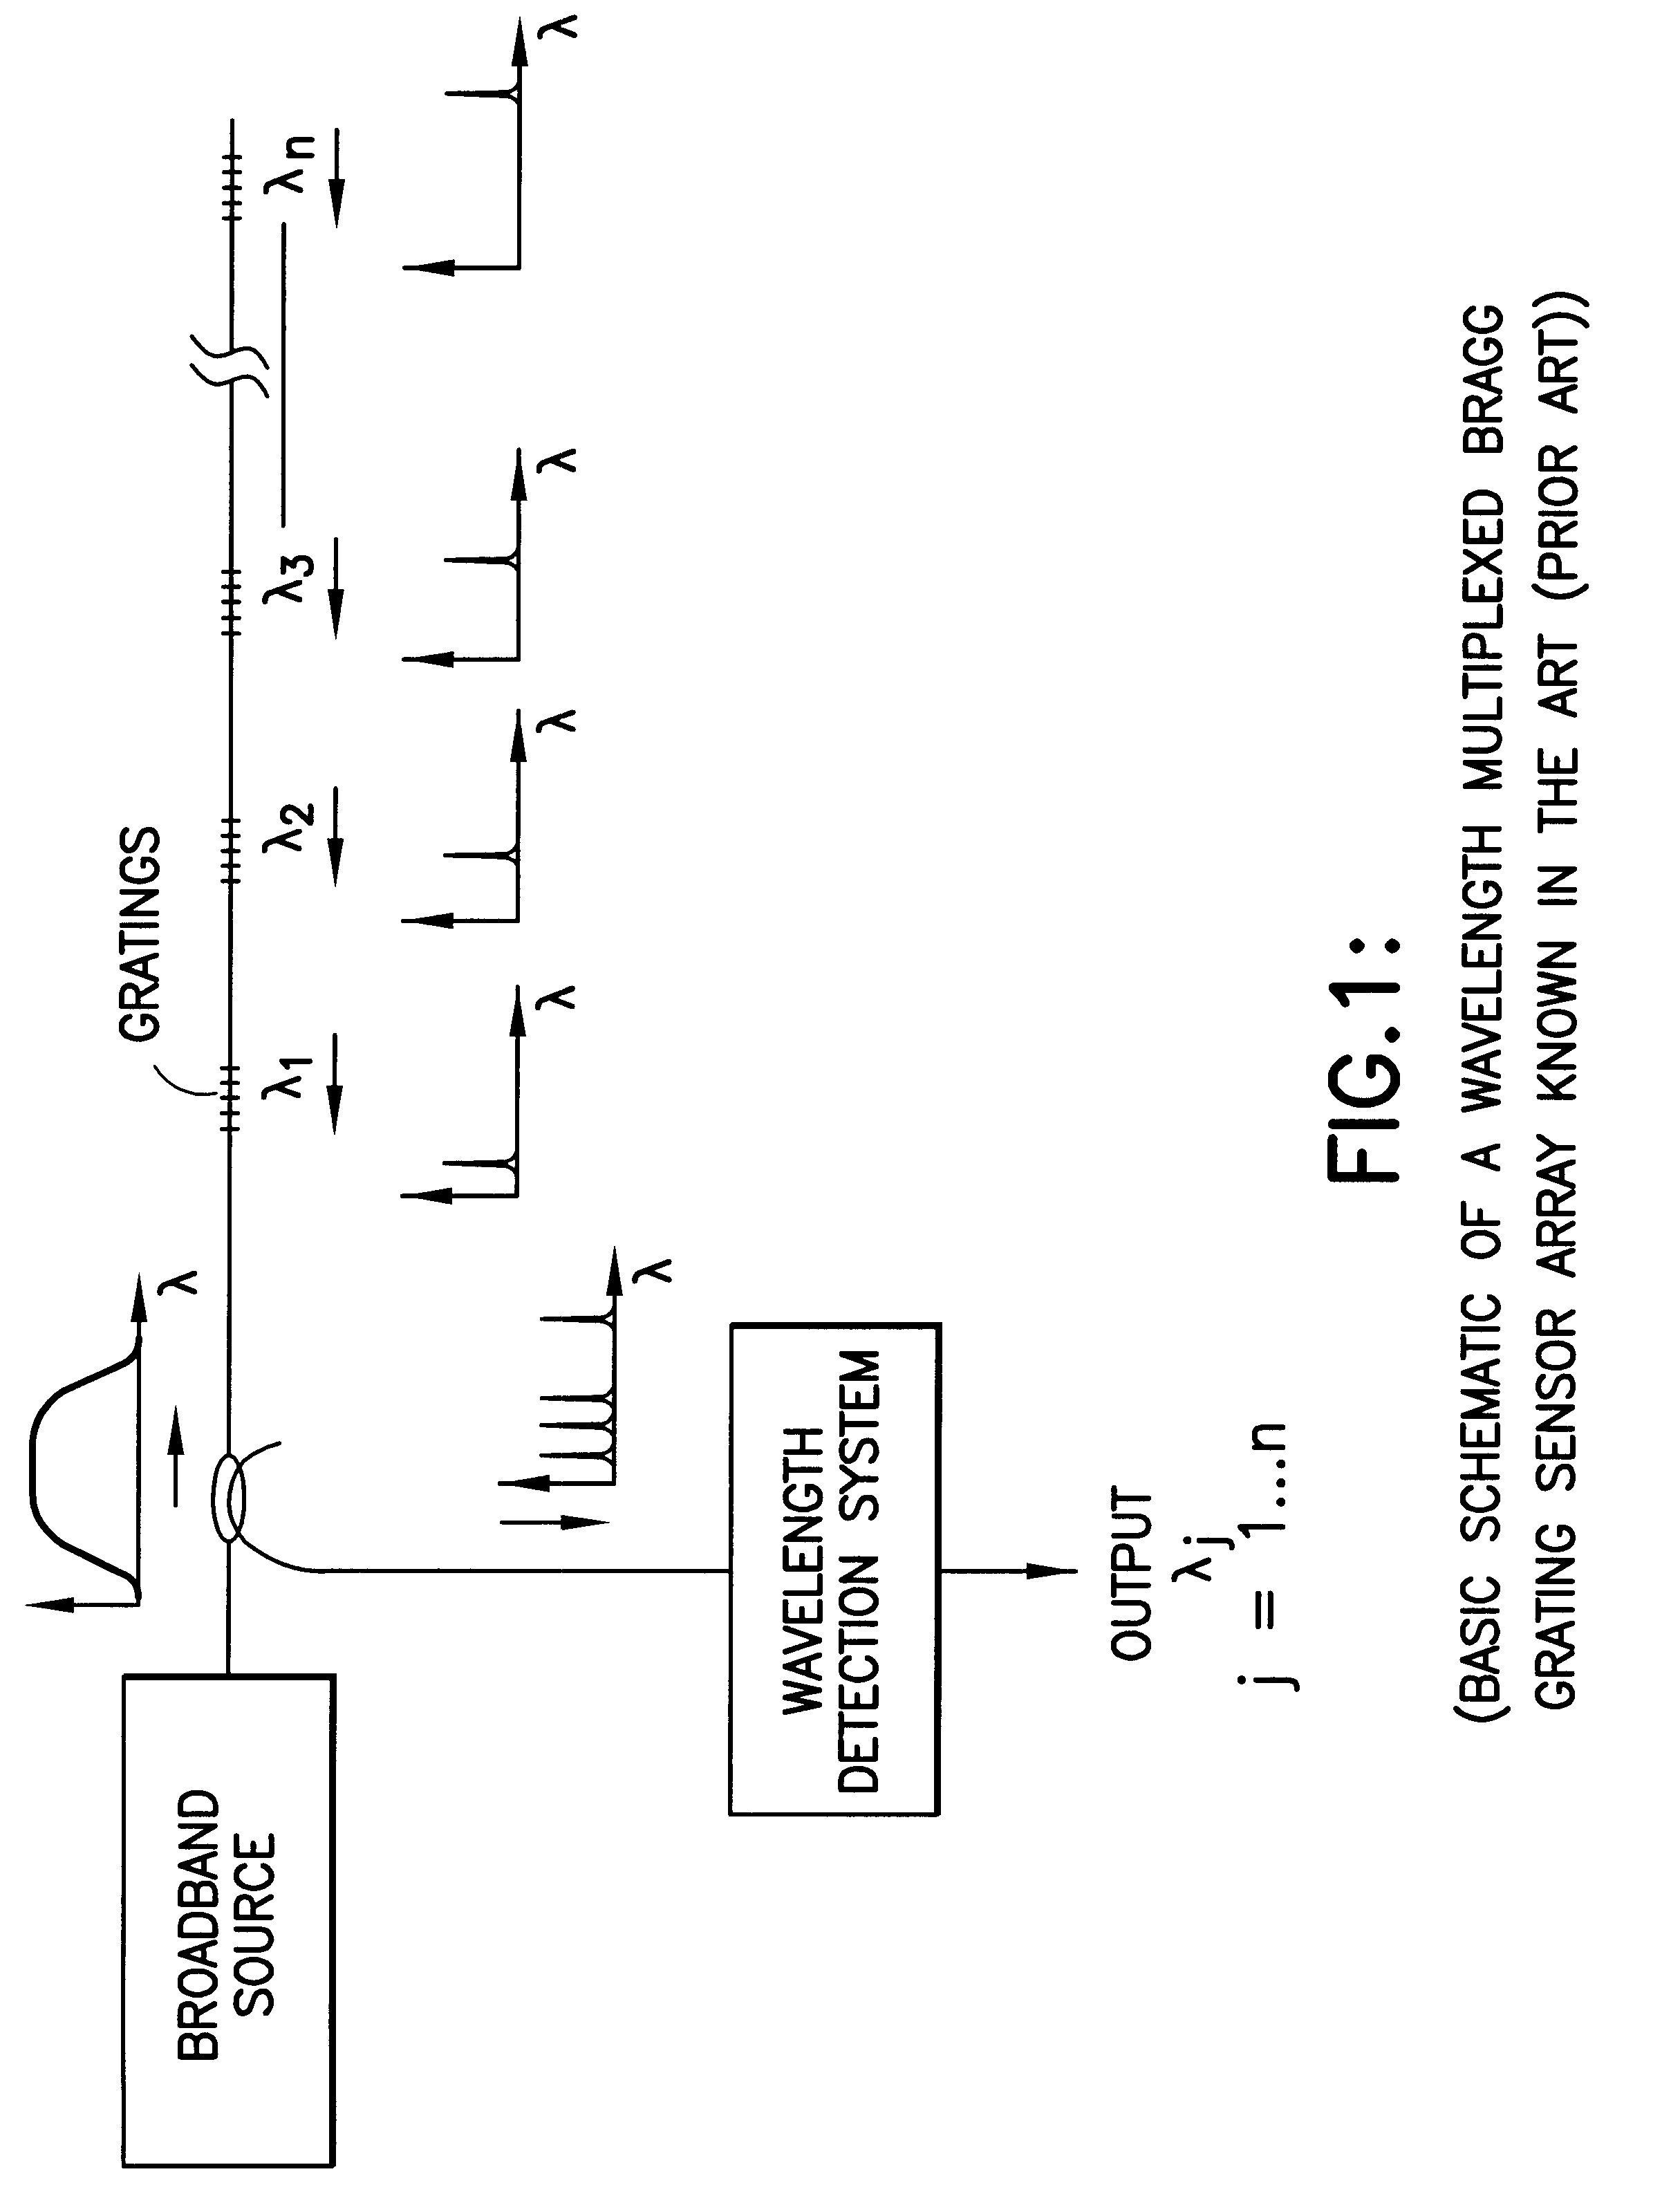 Bragg grating sensor system with spectral response or code division multiplexing